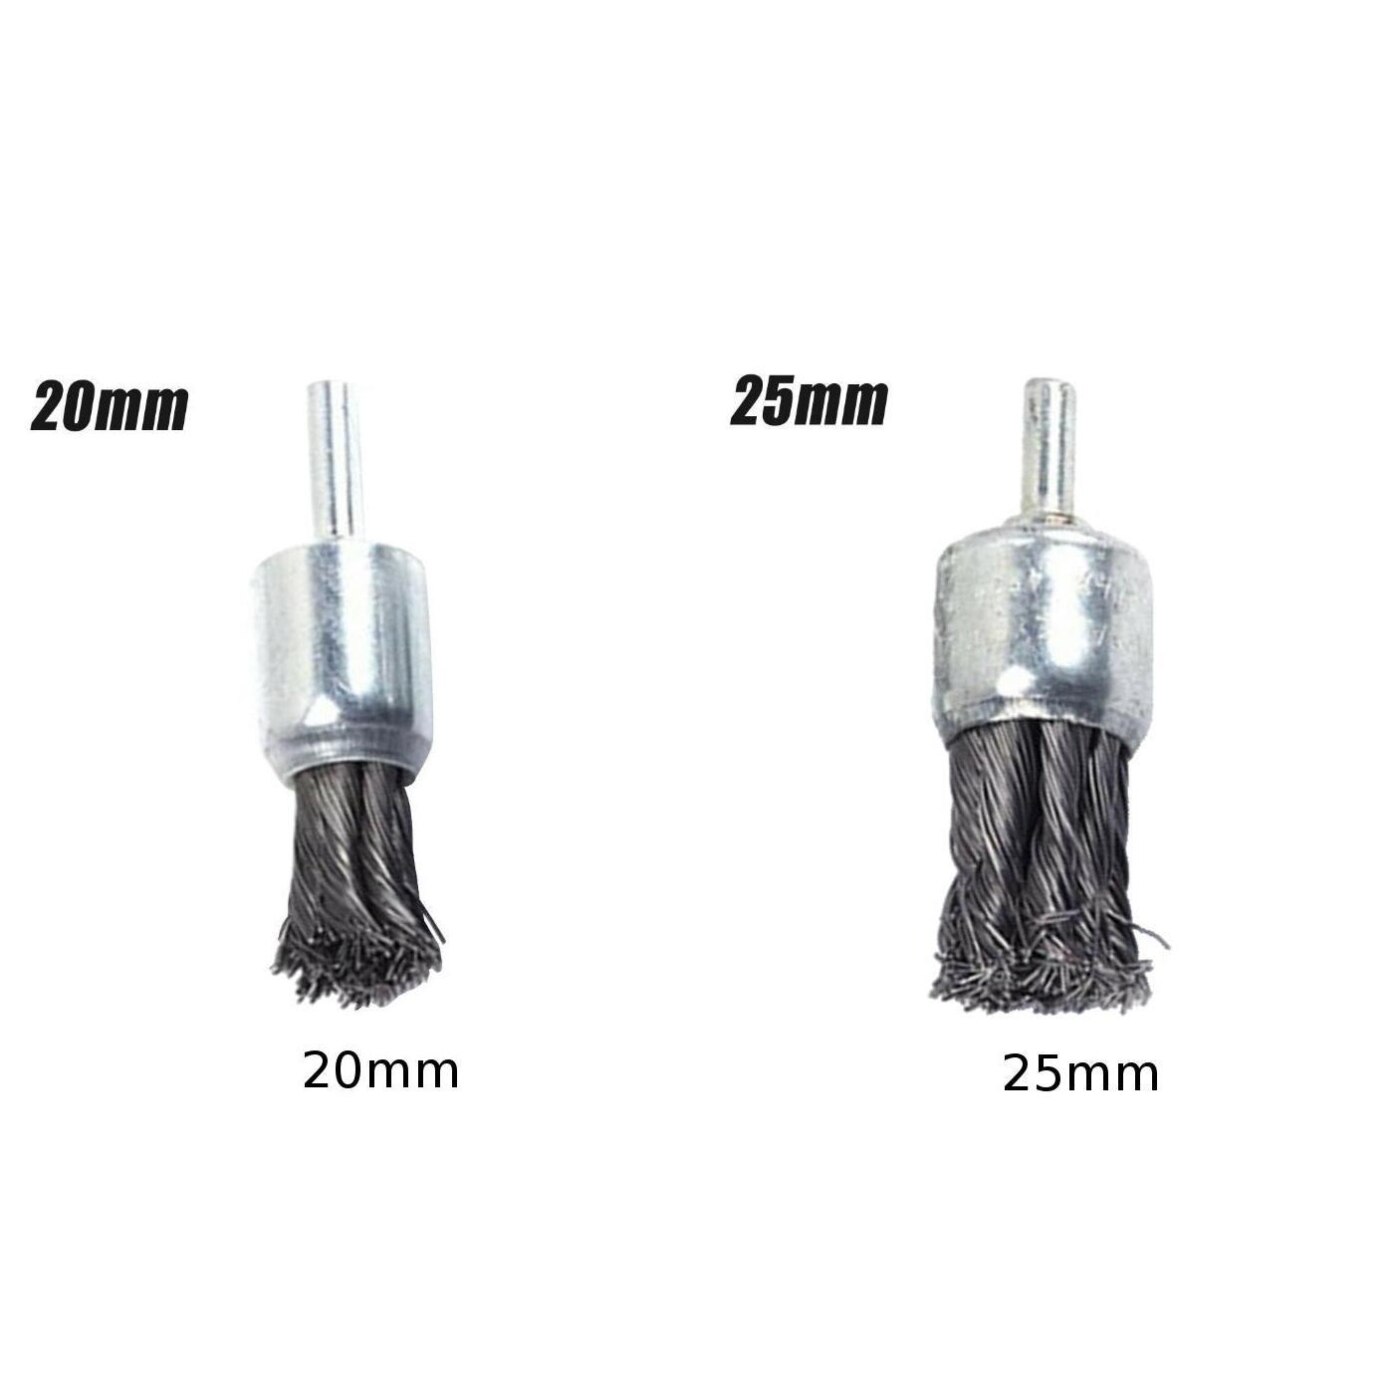 70mm Steel Brush Cleaning Derusting Grinding Polishing Replacement Part